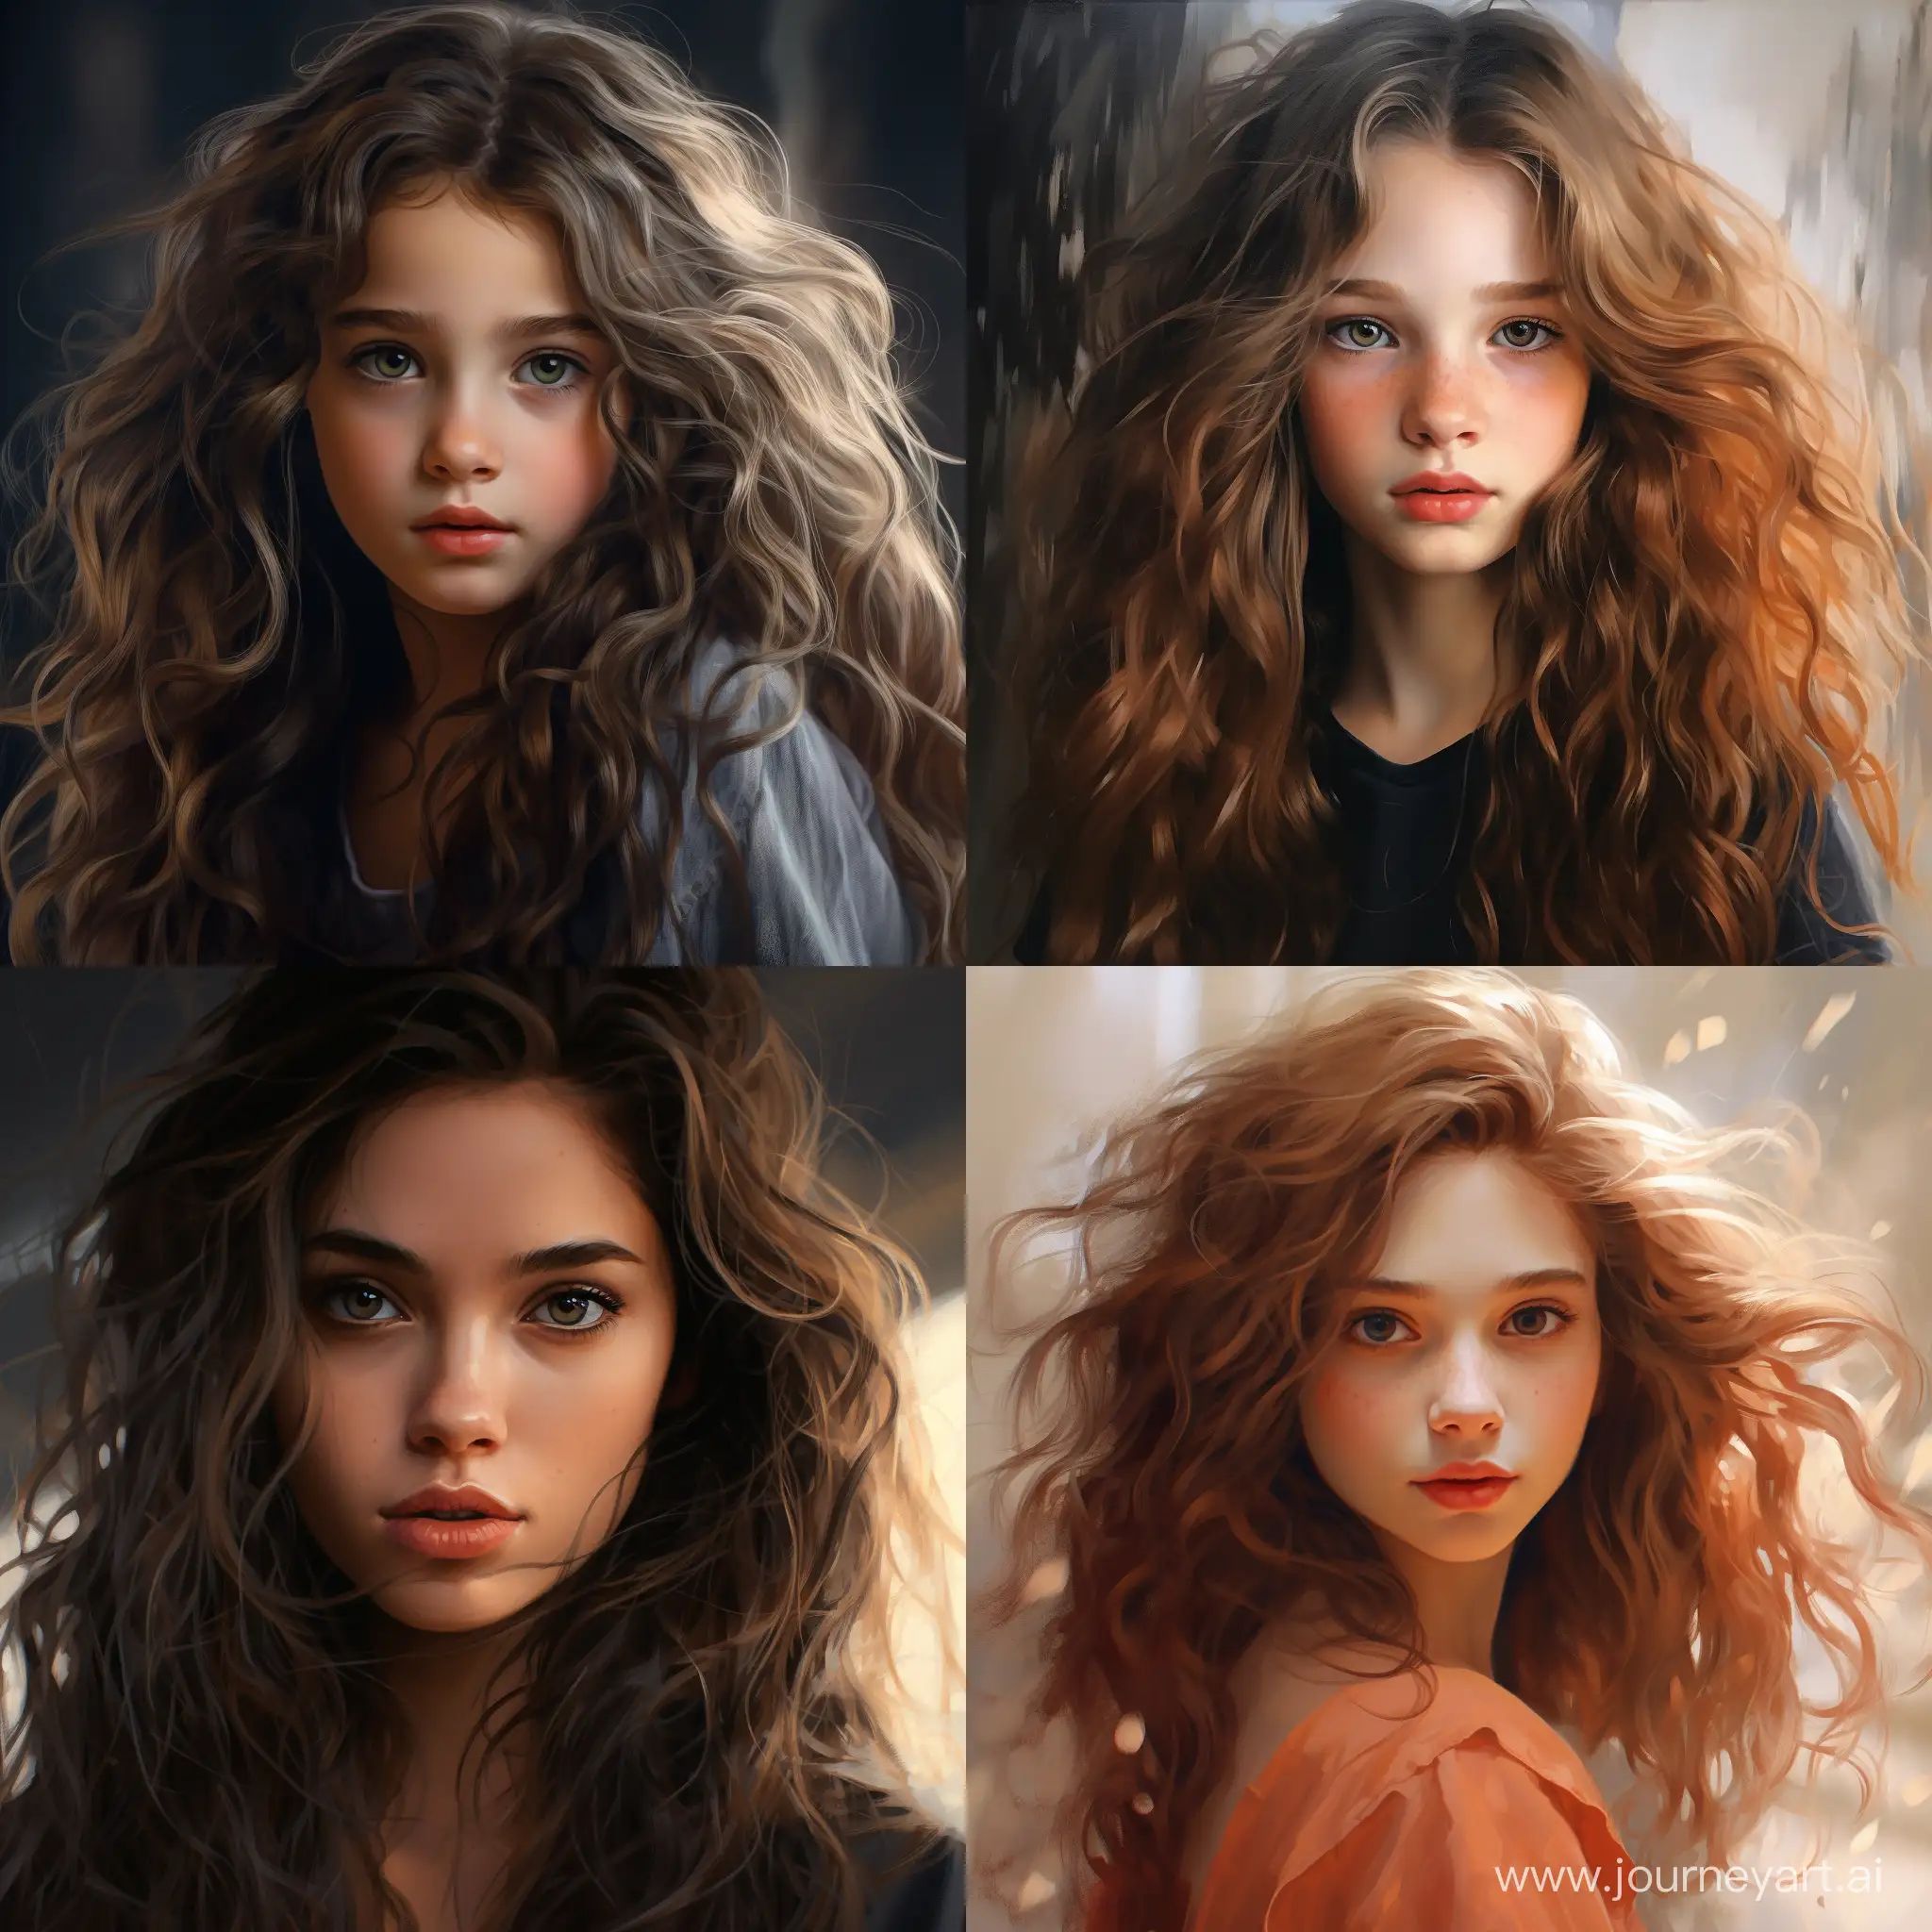 Captivating-Portrait-of-a-Girl-in-a-11-Aspect-Ratio